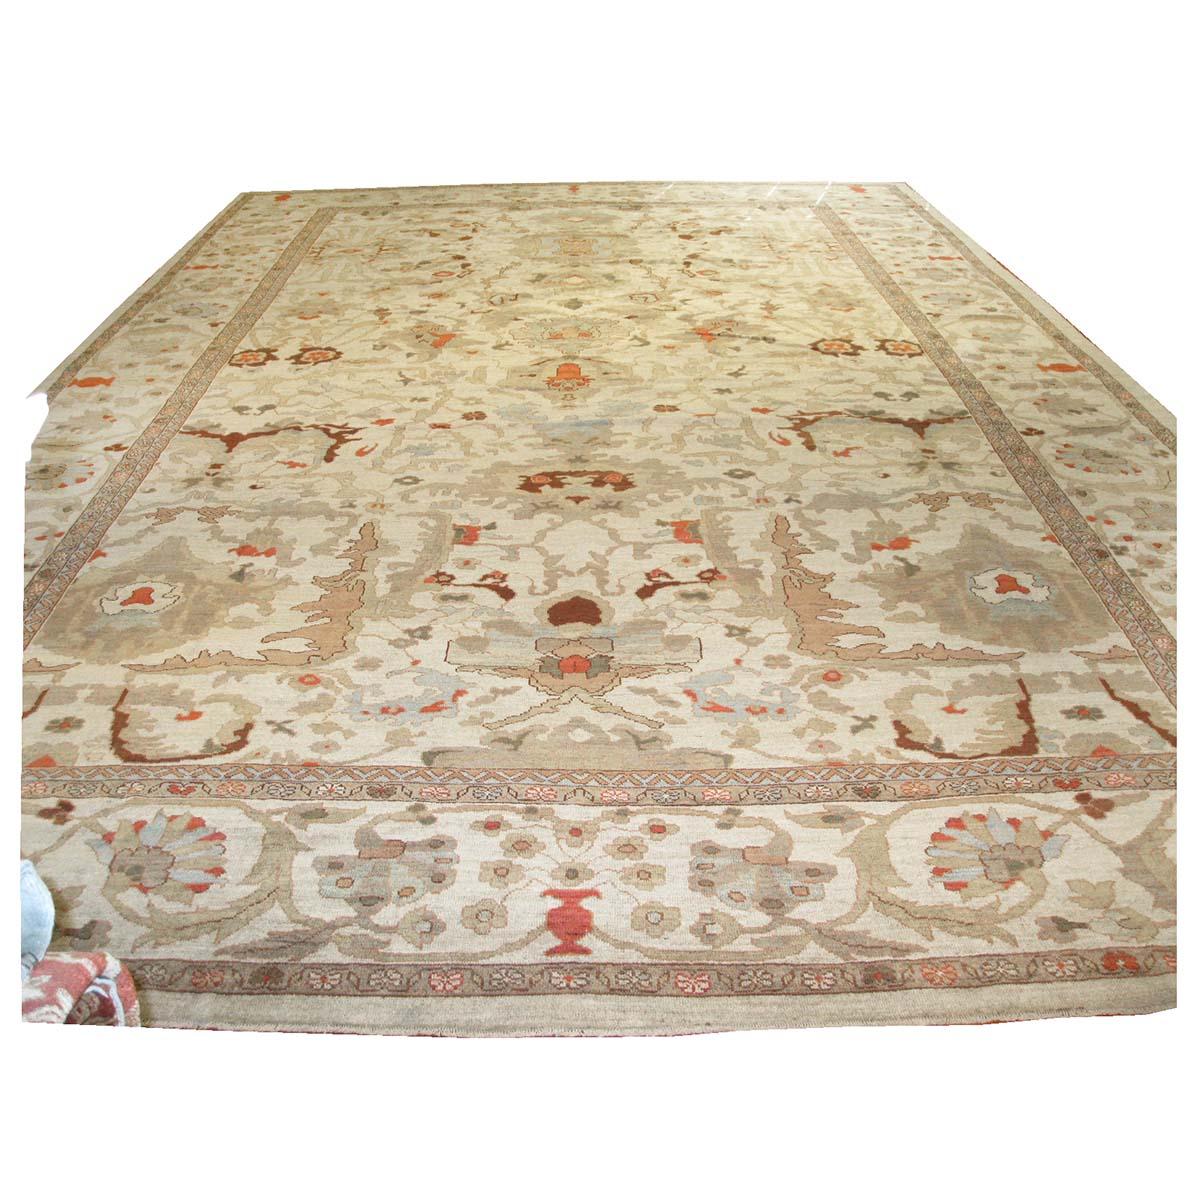 Ashly Fine Rugs presents an antique recreation of an original Persian Sultanabad 13x20 Ivory, Tan, & Blue Handmade Area Rug. Part of our own previous production, this antique recreation was thought of and created in-house and 100% handmade in Iran